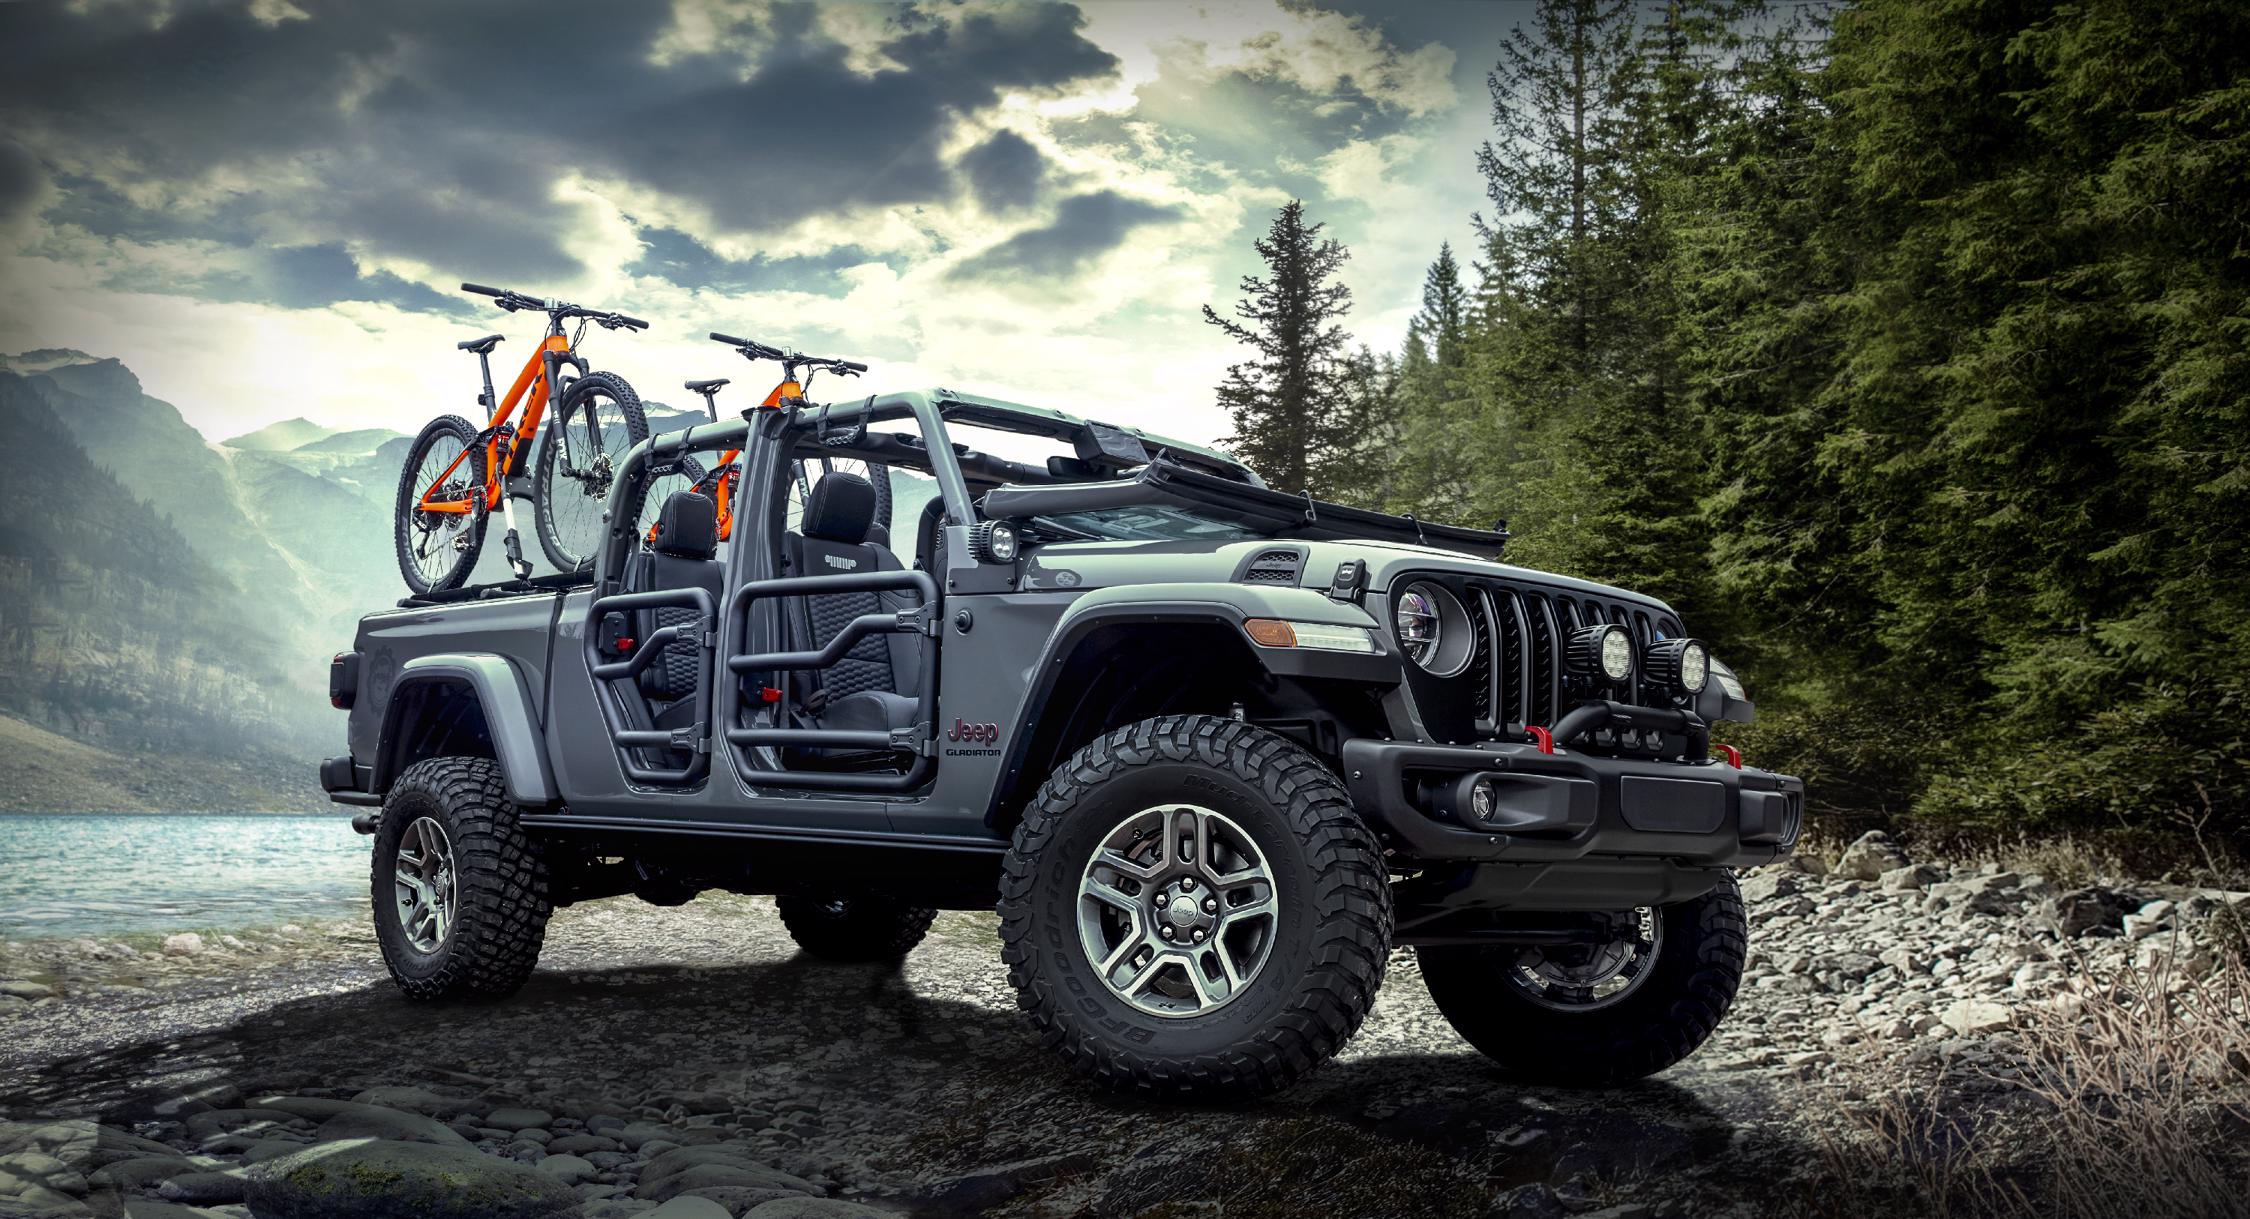 More Than 200 Mopar Accessories Available for 2020 Jeep Gladiator The